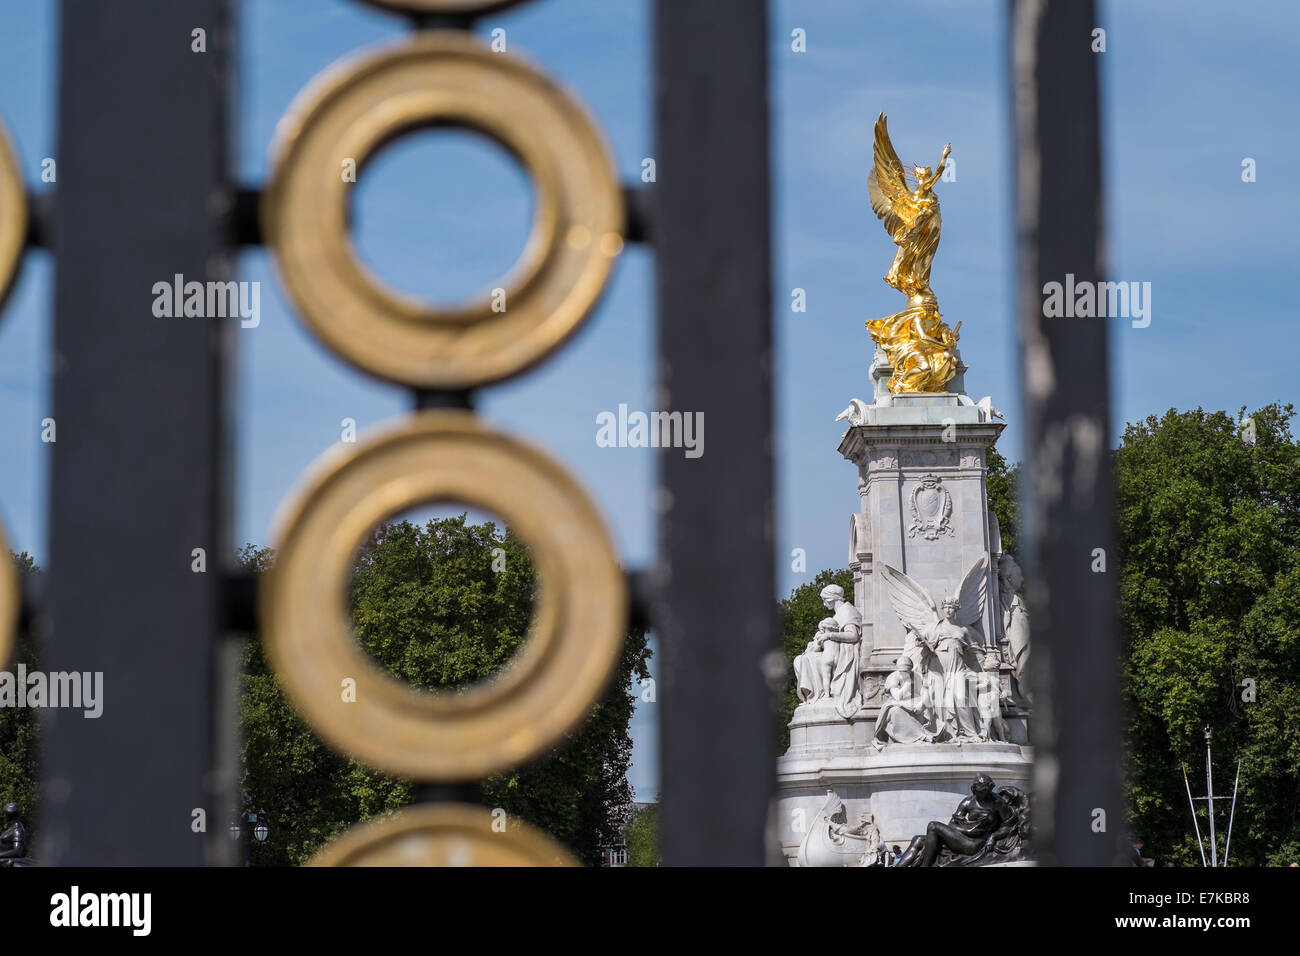 The Victoria Memorial seen through gates near Buckingham Palace on a summers day Stock Photo